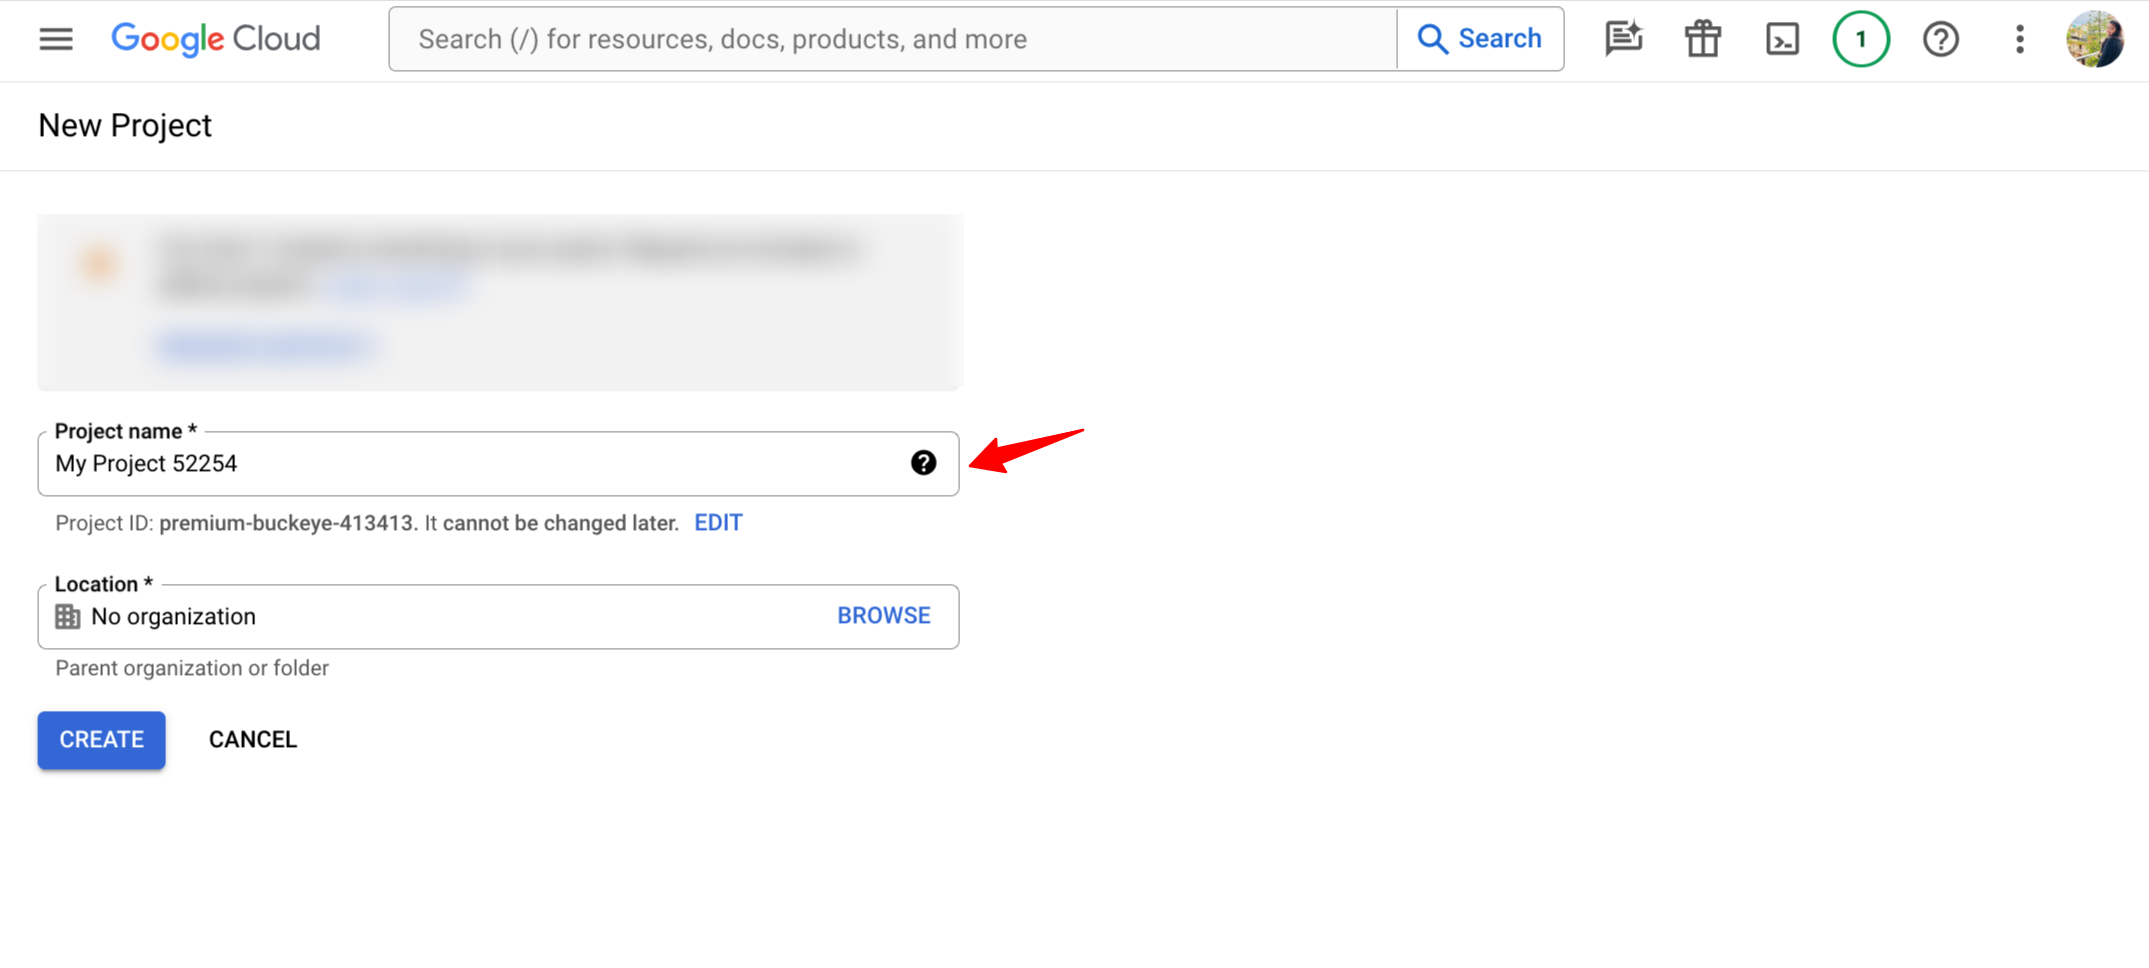 Google Cloud: Provide Project Name